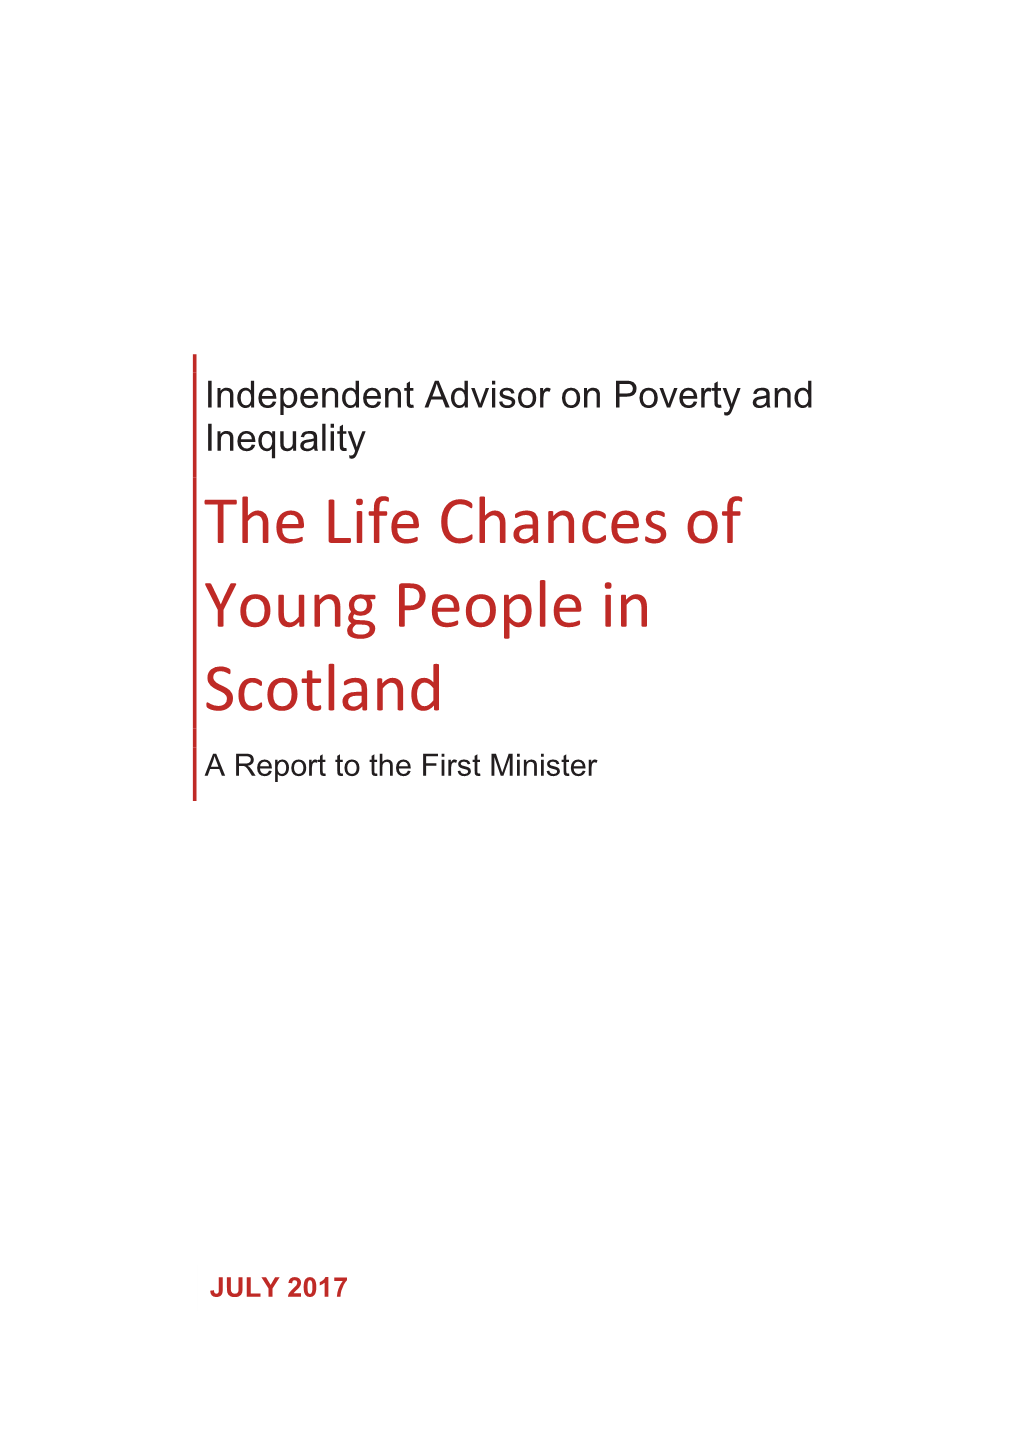 Independent Advisor on Poverty and Inequality: the Life Chances of Young People in Scotland